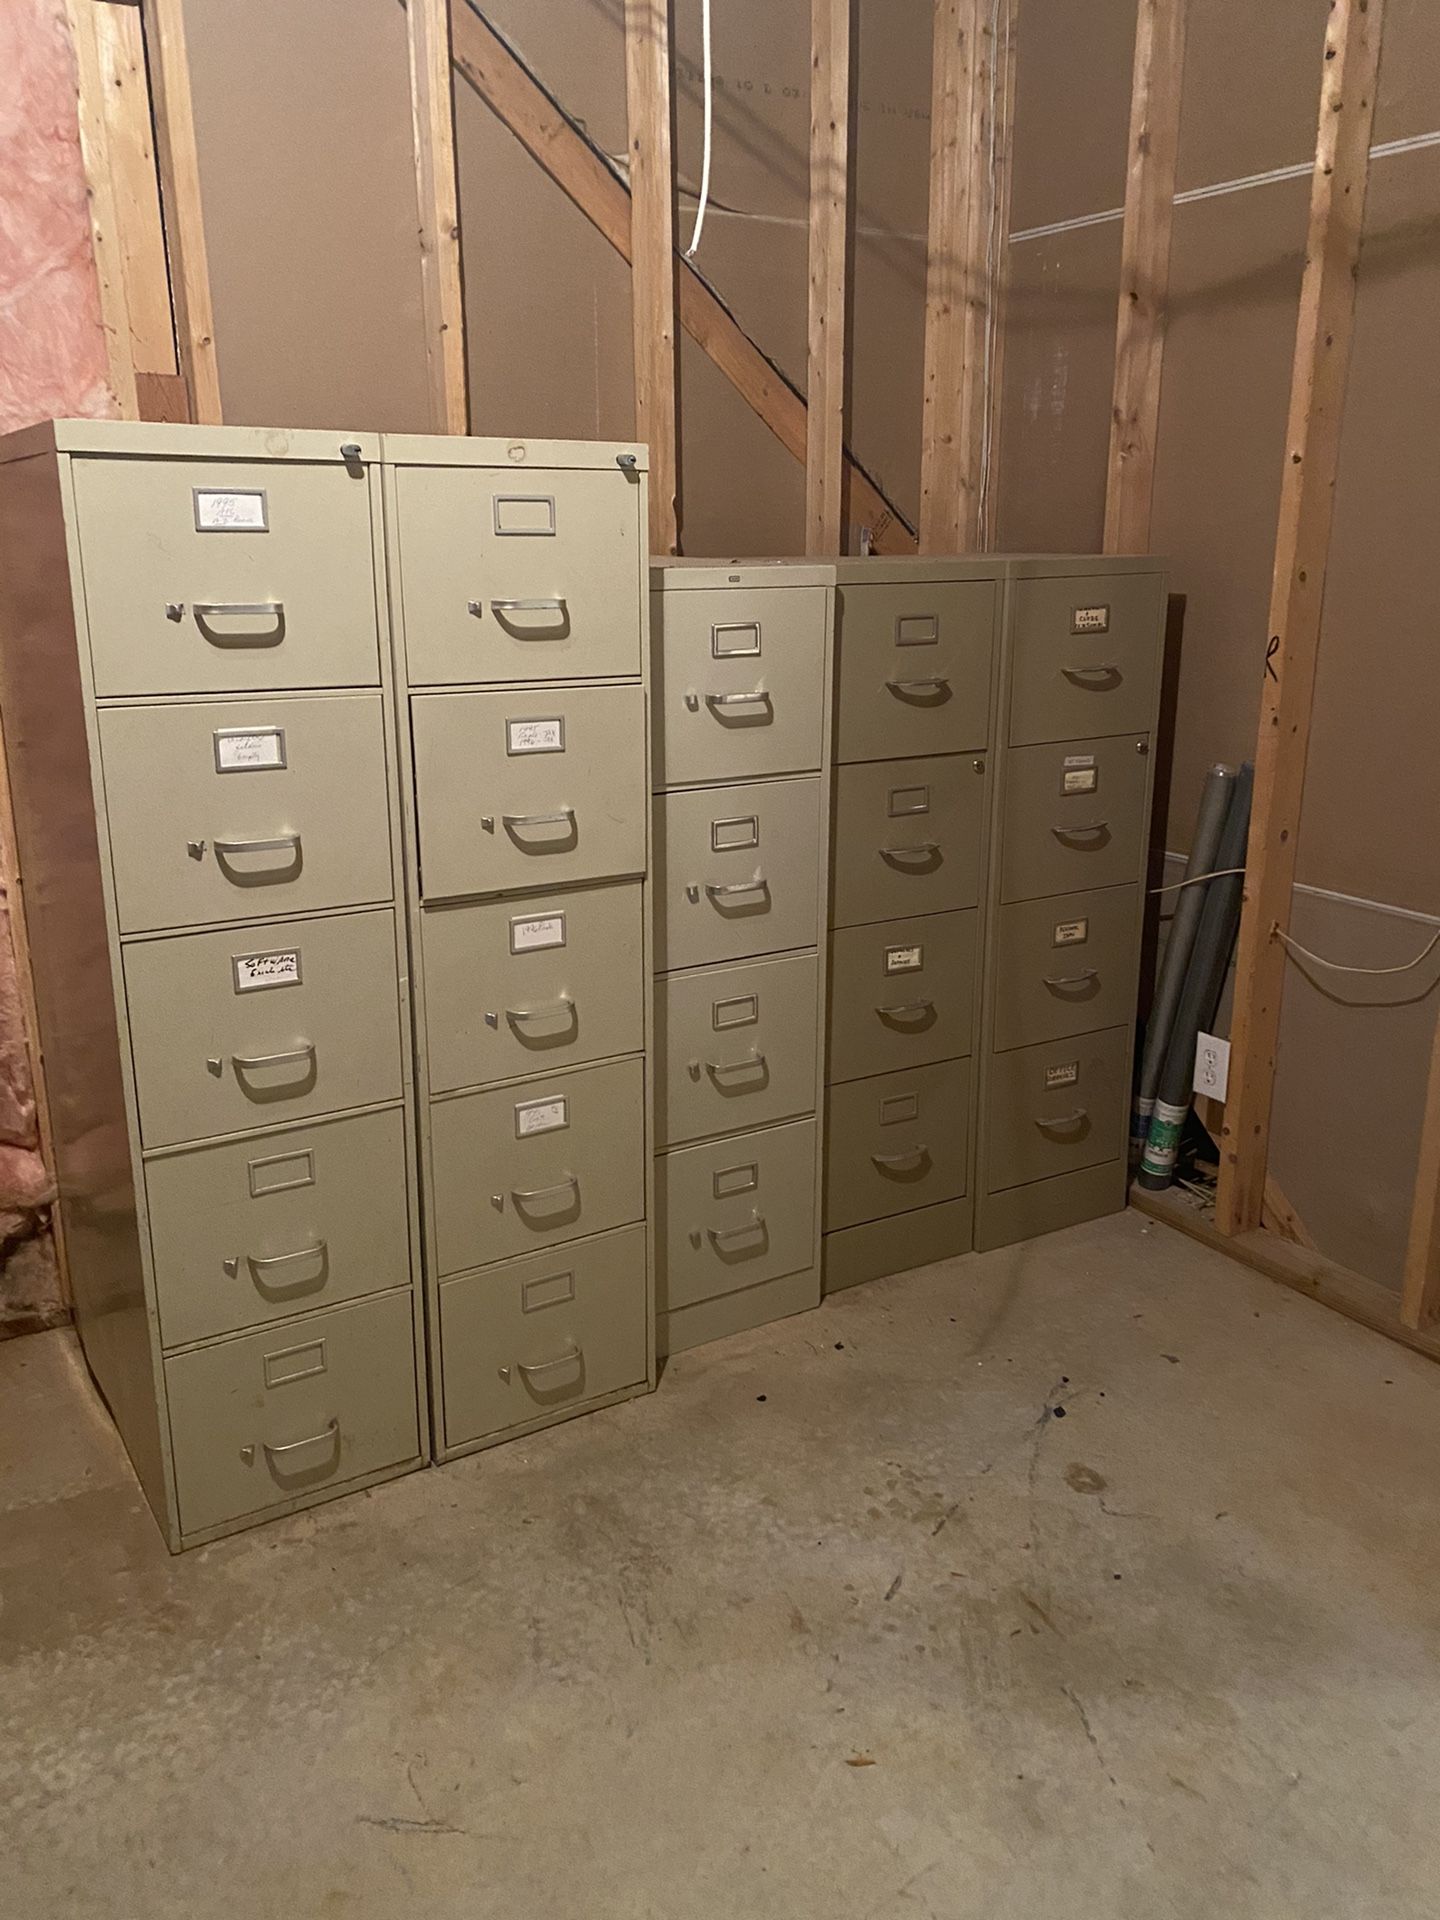 5 file cabinets in great condition